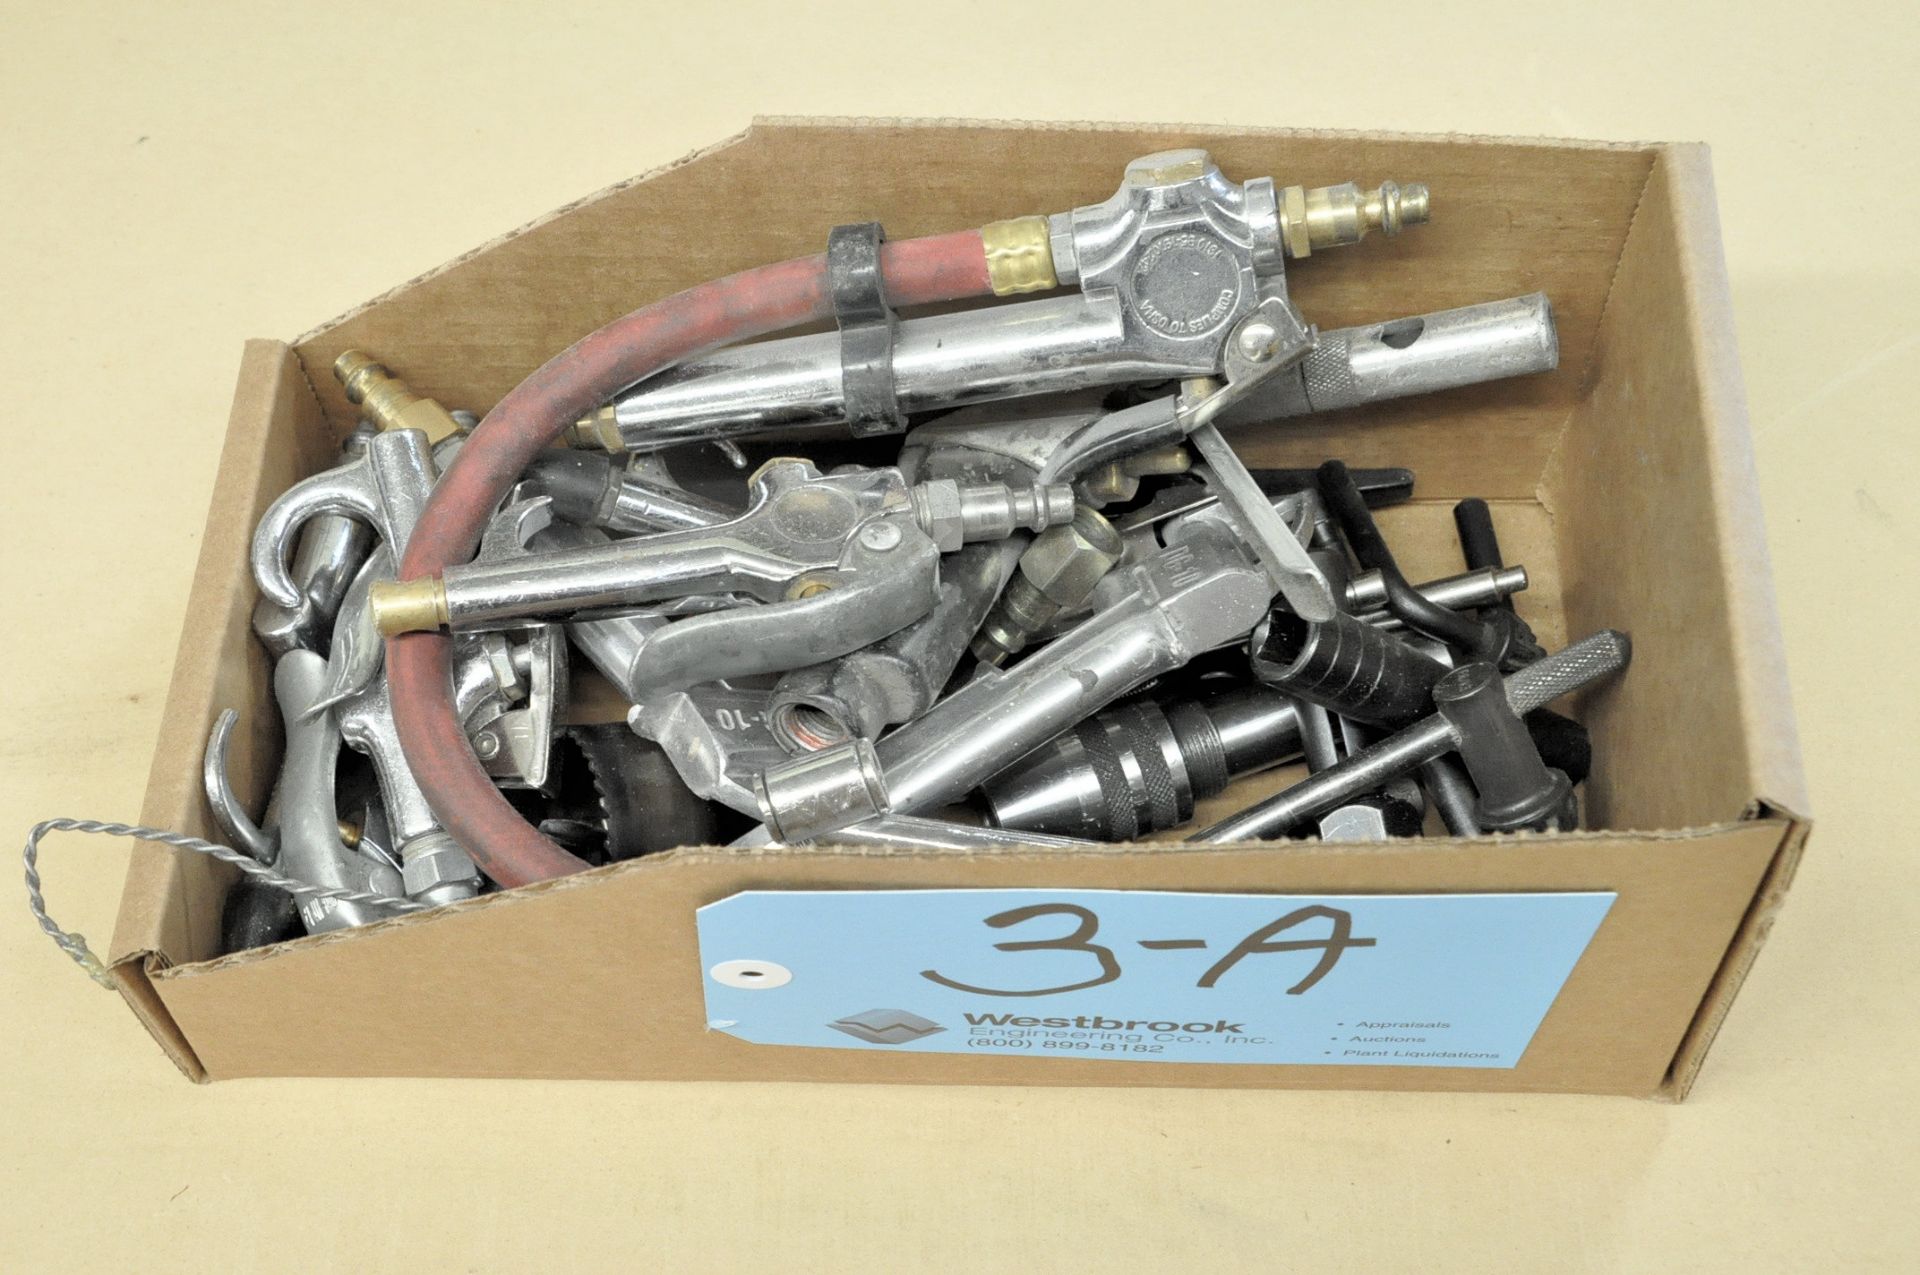 Lot-Air Bow Off Tools and Tire Chucks in (1) Box